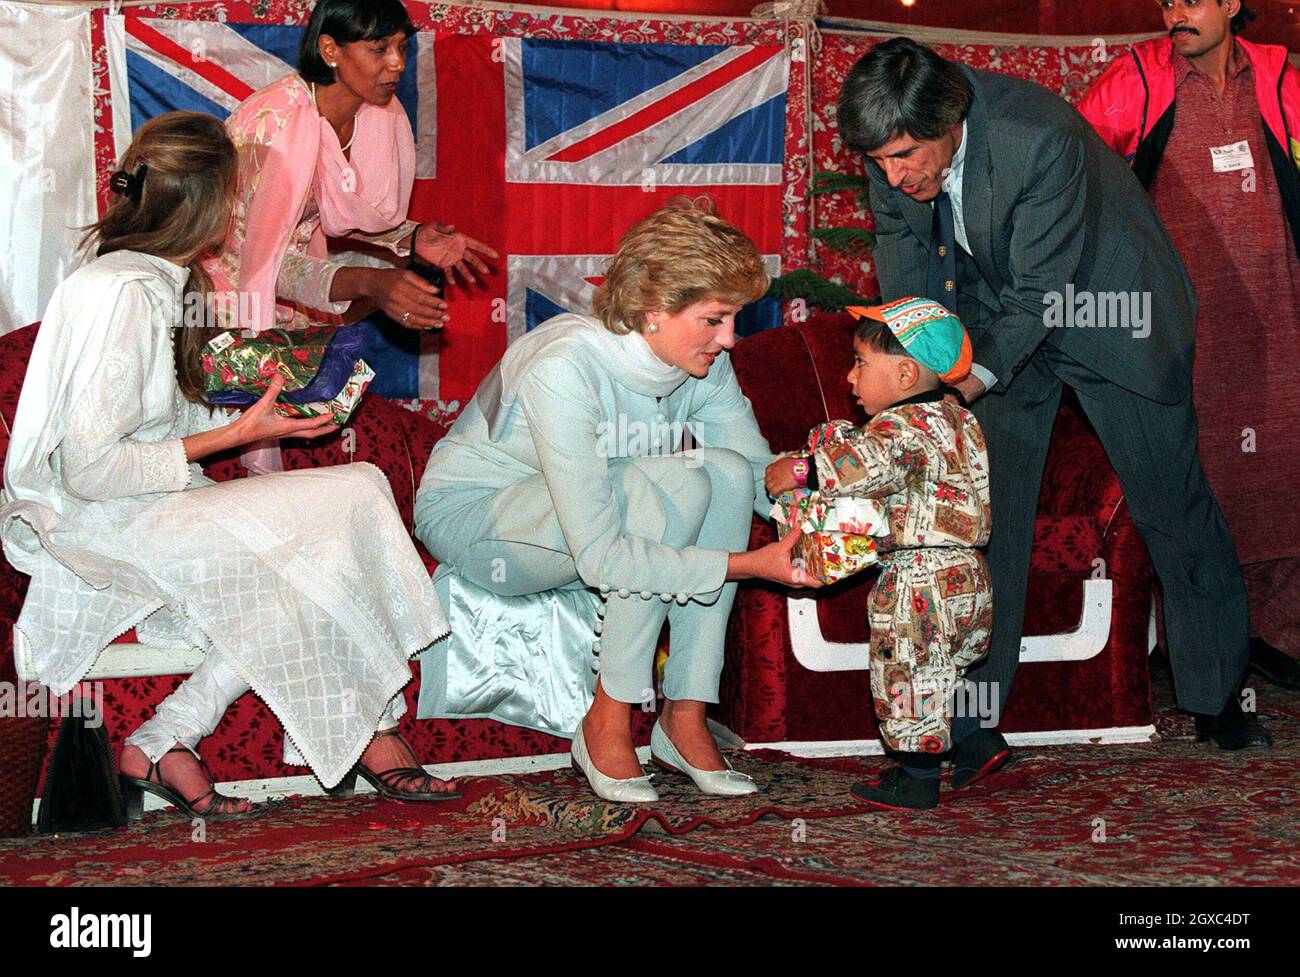 Diana, Princess of Wales and Jemima Khan give presents to sick children during a visit to Imran Khan's cancer hospital in Lahore, Pakistan during April 1996. Stock Photo